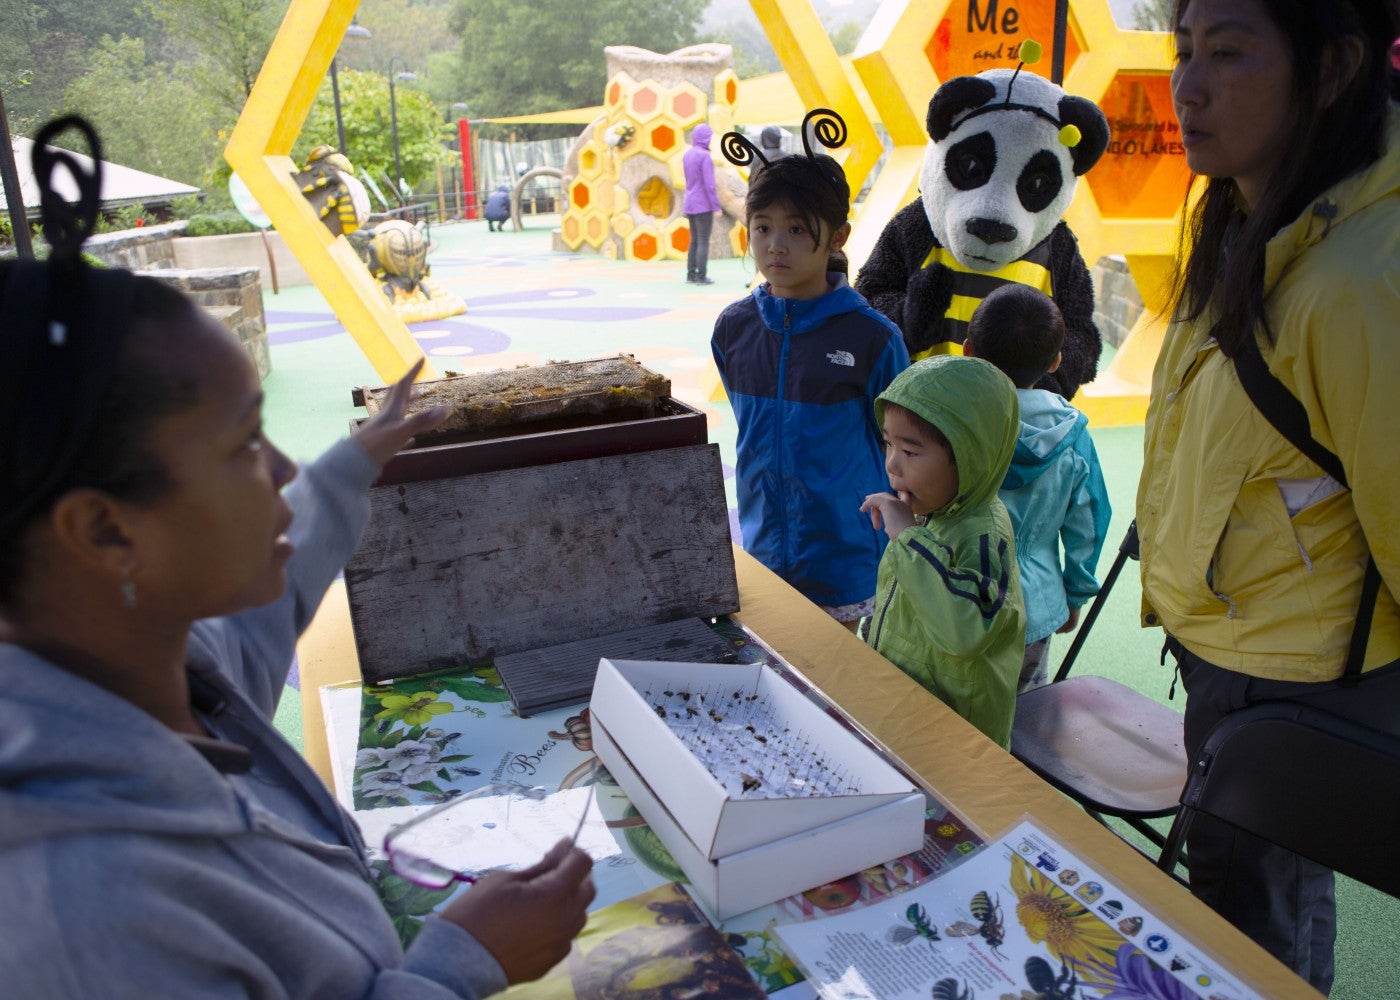 Donna Stockton, an entomologist and animal keeper at Amazonia, speaks with visitors about the importance of pollinators at the Me and the Bee Playground.